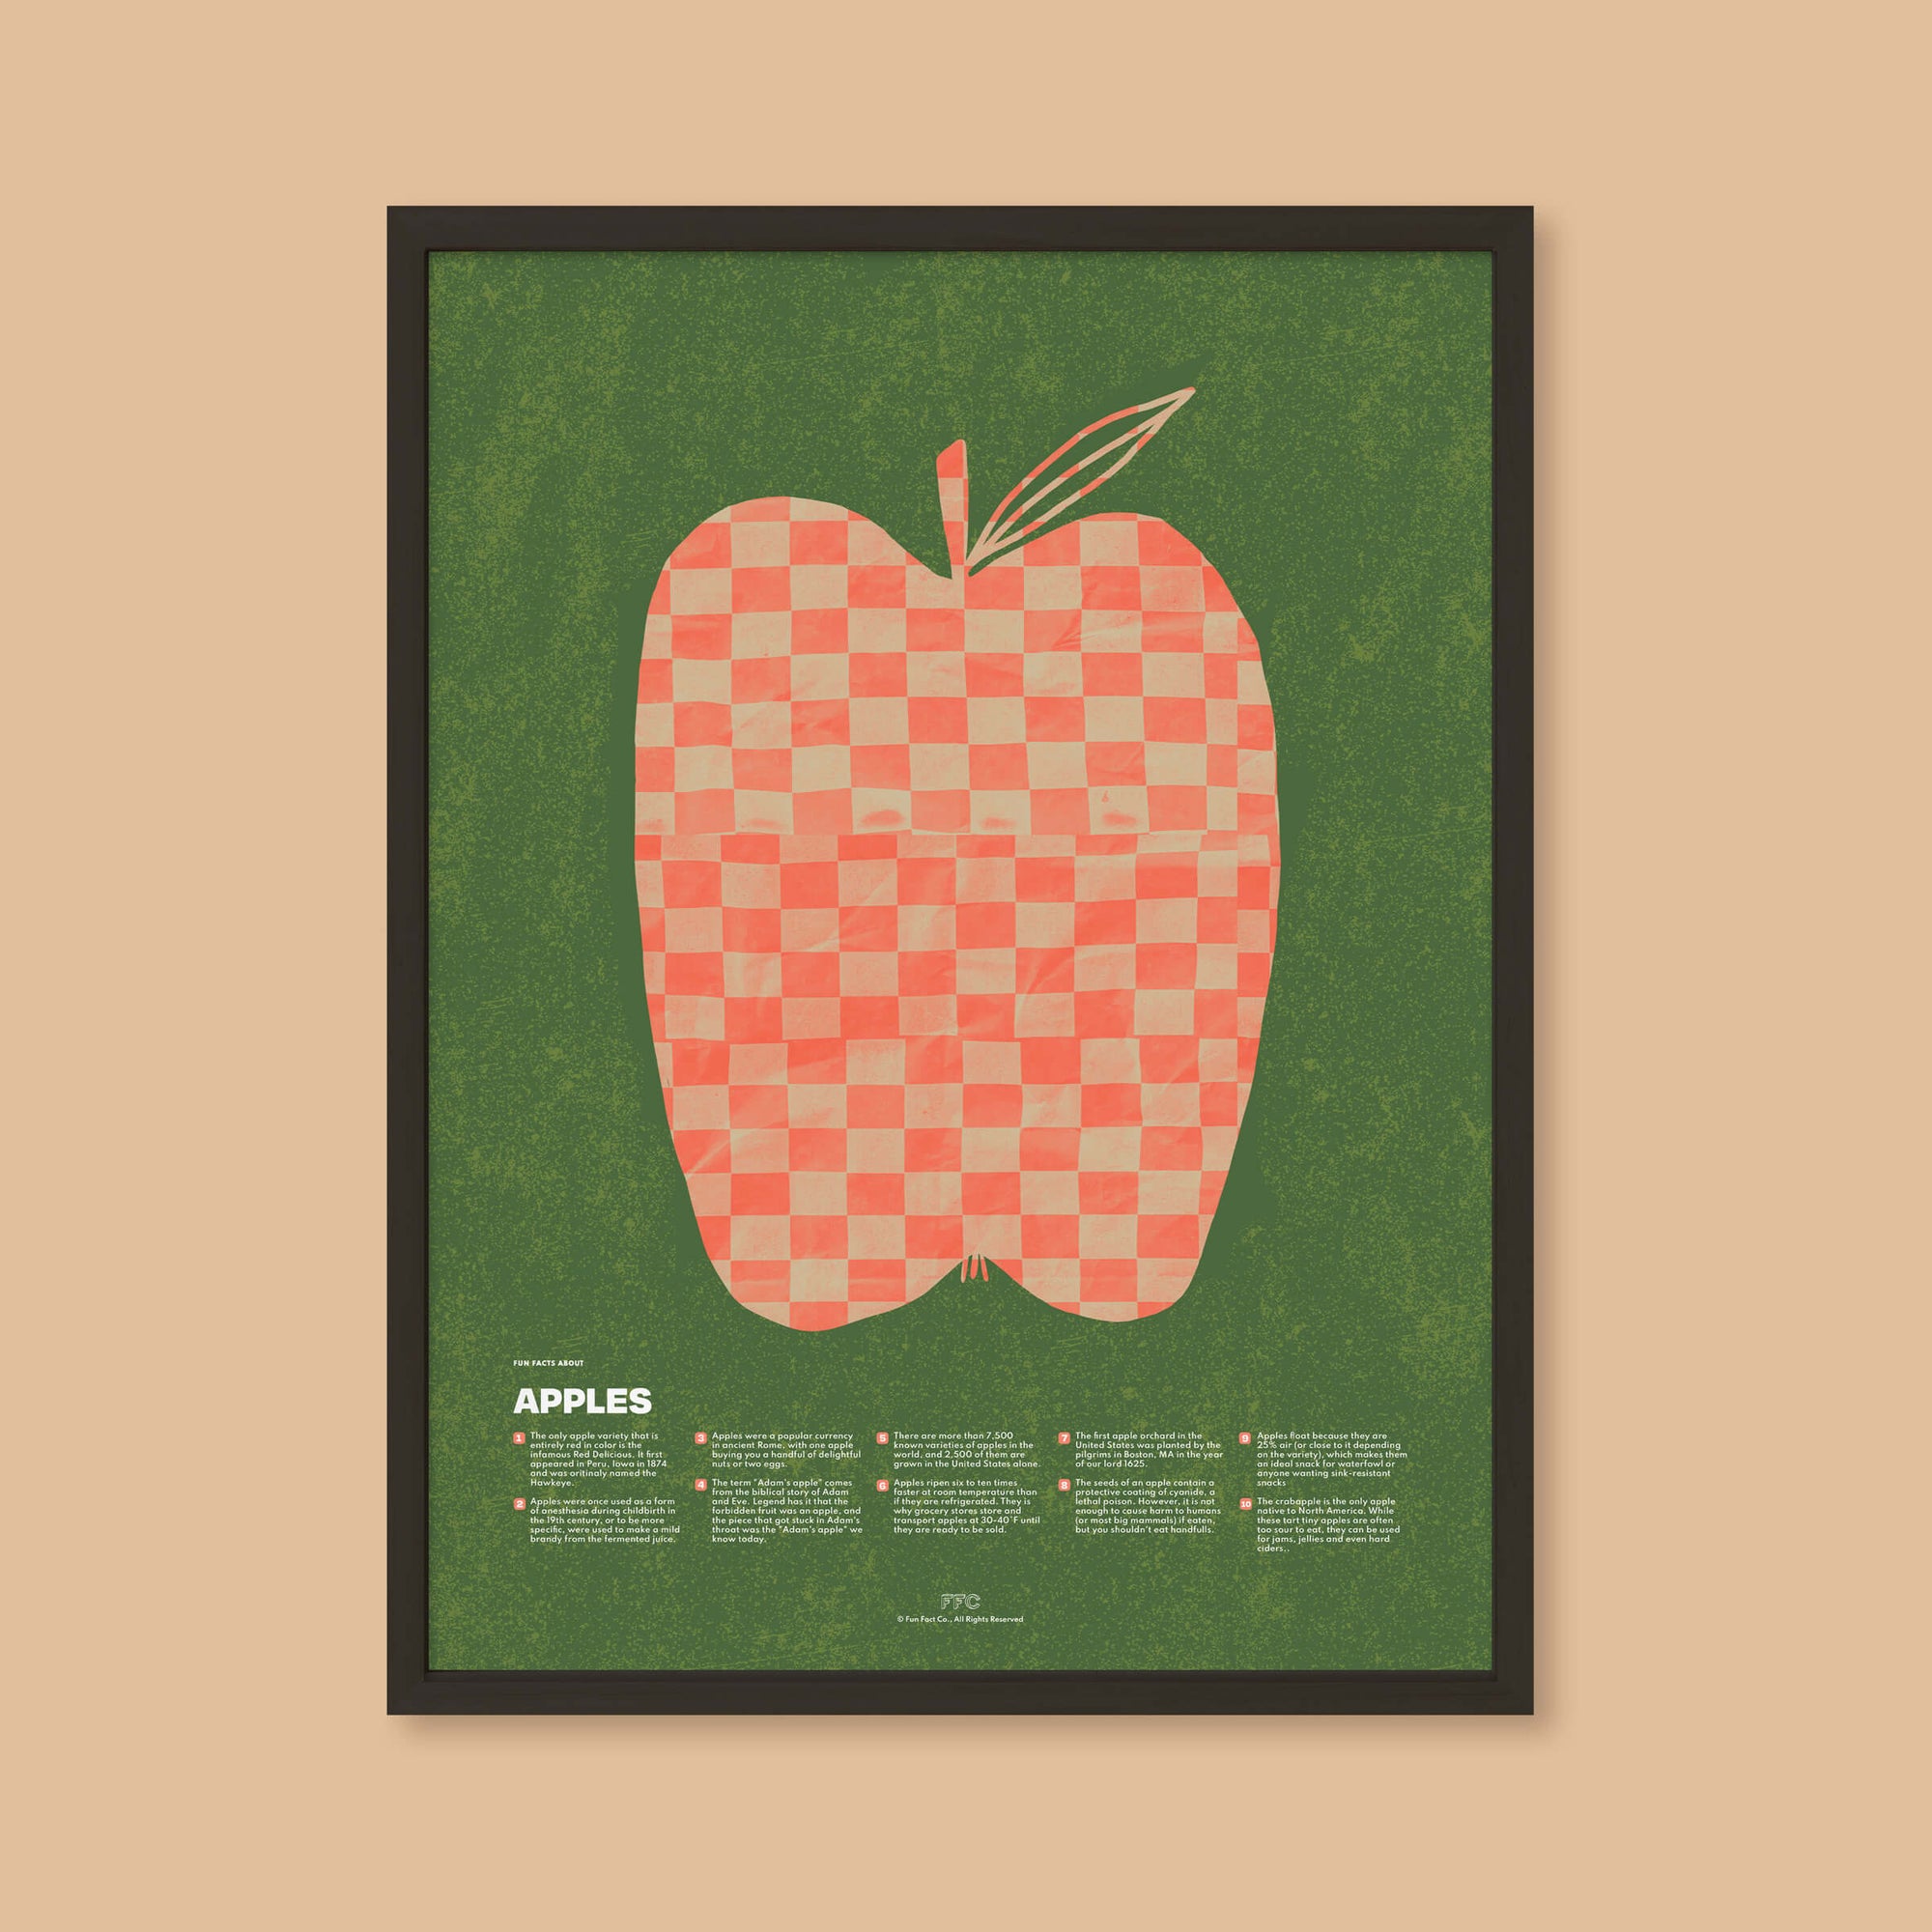 Apple Fun Facts Print - Black Frame - Educational Poster by Fun Fact Co.